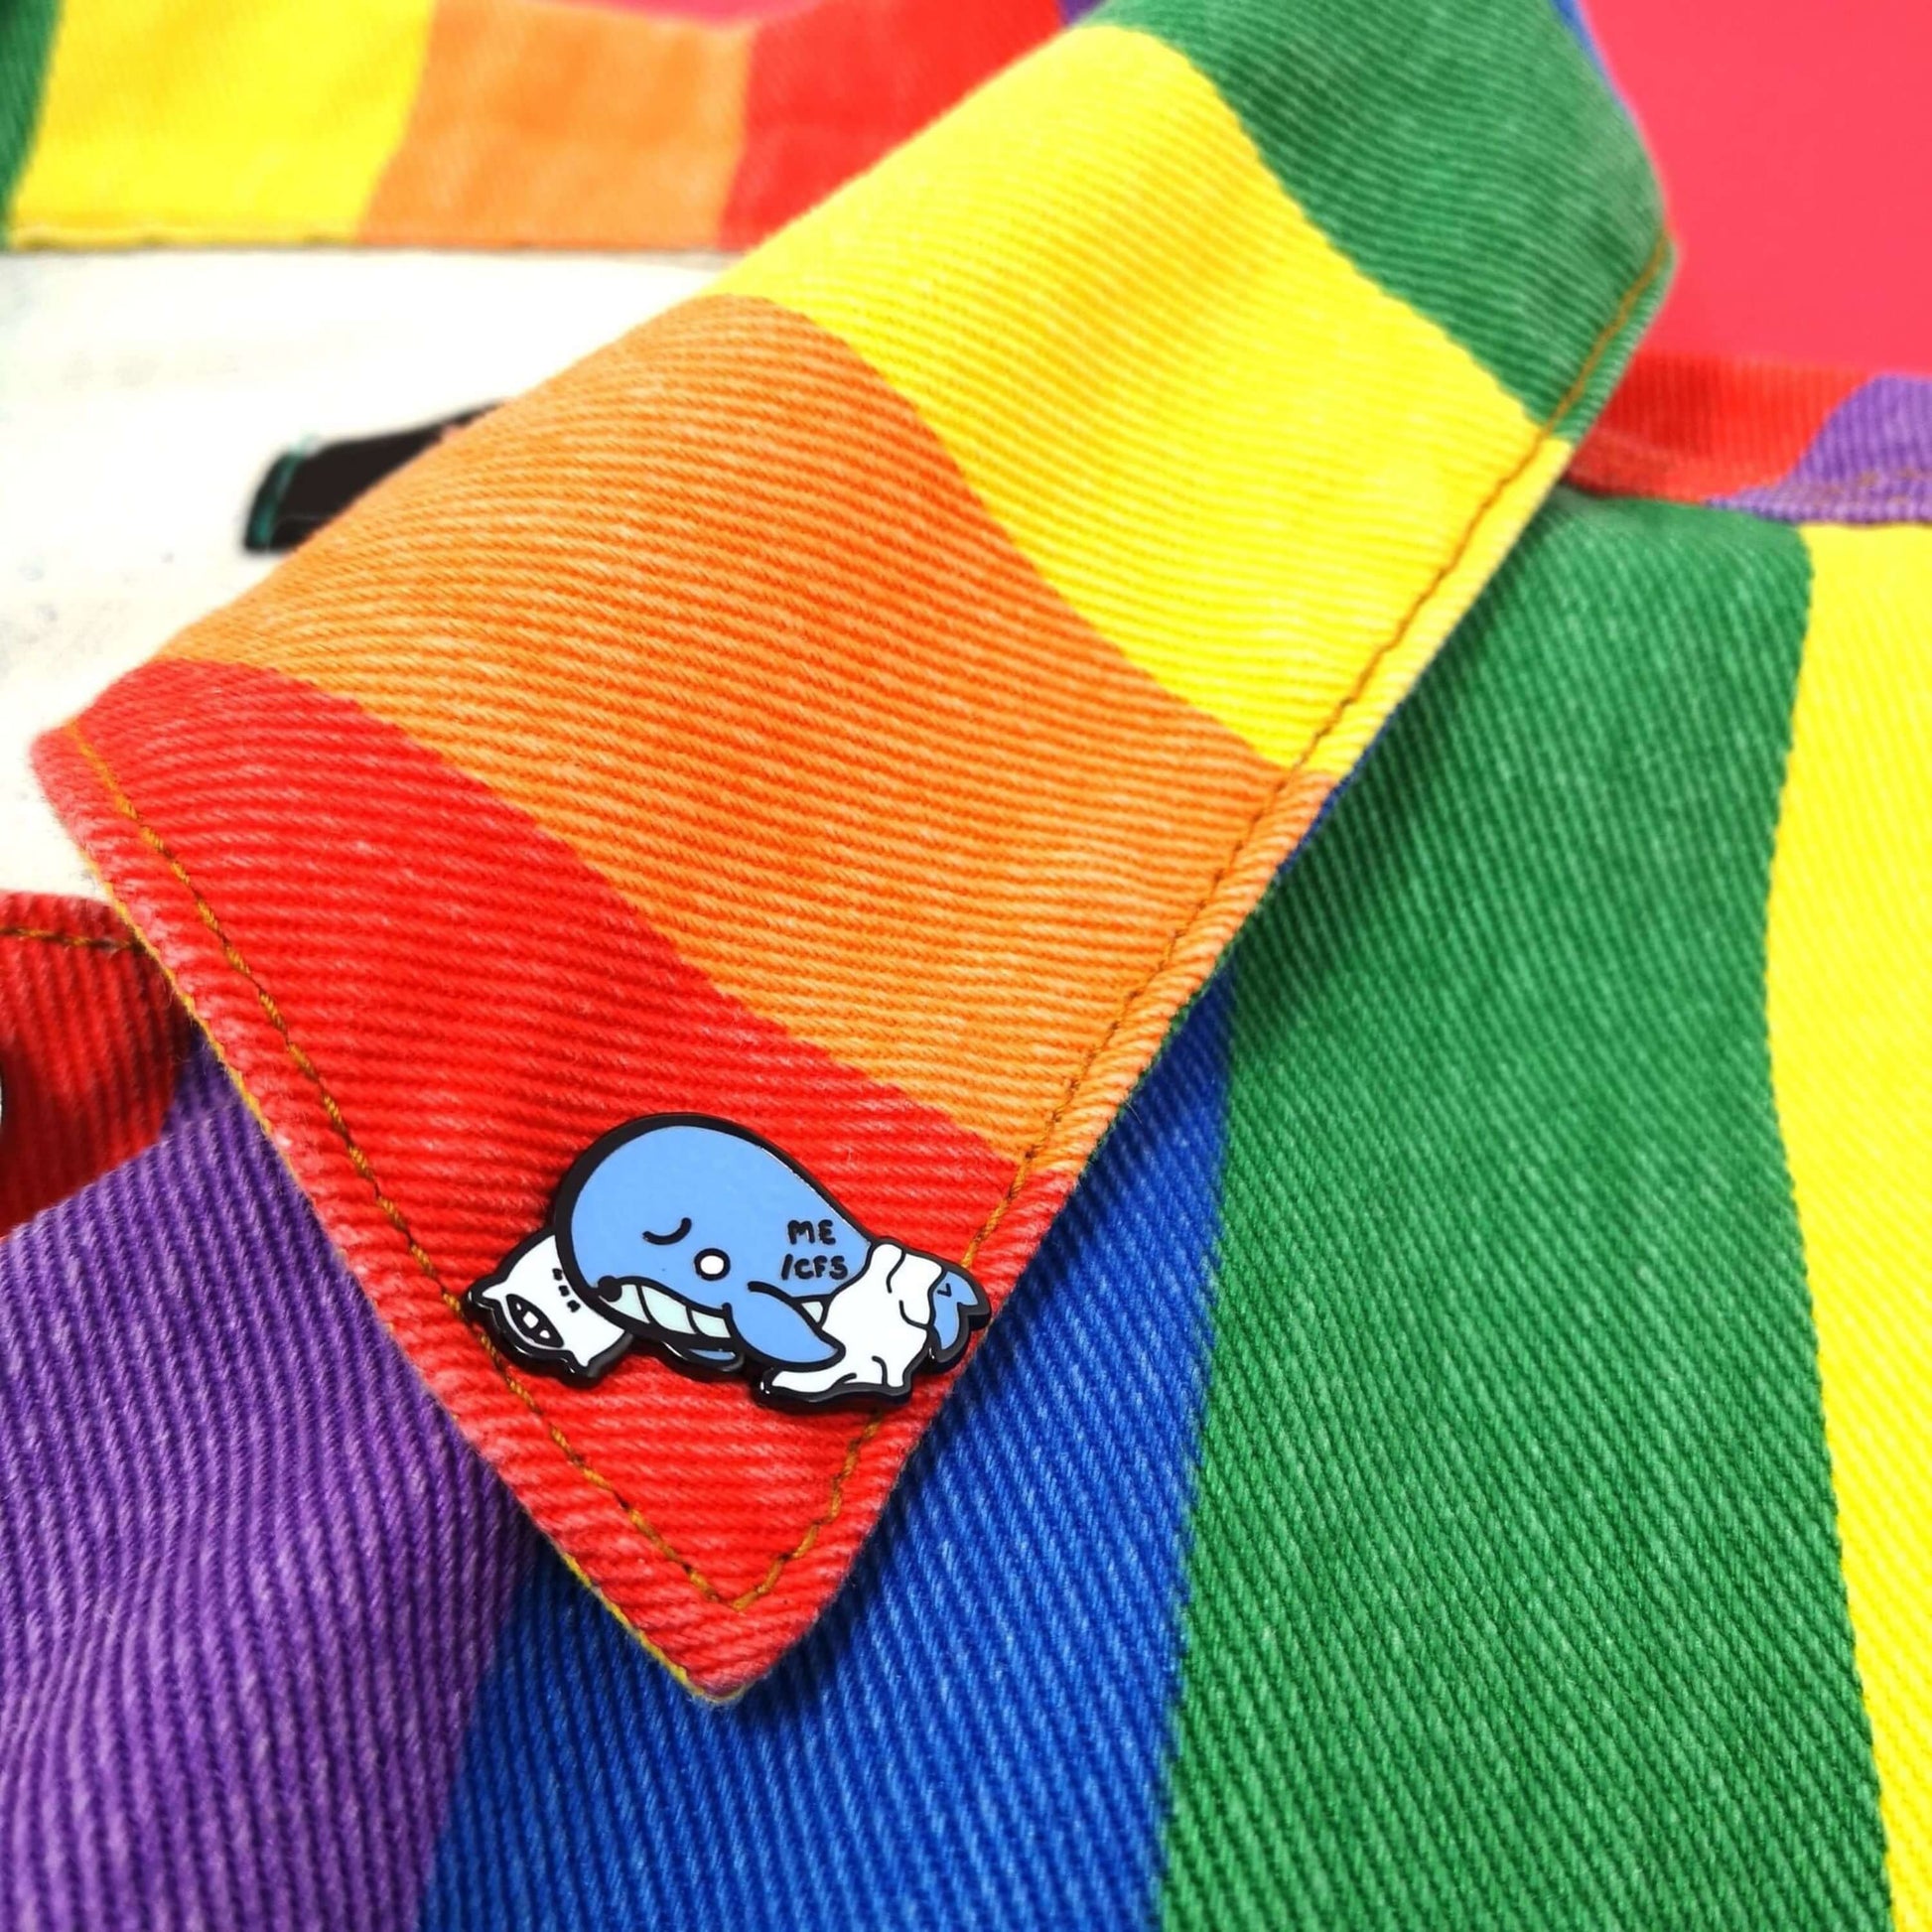 Mywhalegic Enamel Pin - Myalgic Encephalomyelitis (ME/CFS) pinned onto a rainbow jacket. The enamel pin is a sleeping blue whale laying on a white pillow with a white blanket over it and ME/CFS written on its back. The enamel pin is designed to raise awareness for Myalgic encephalomyelitis or chronic fatigue syndrome